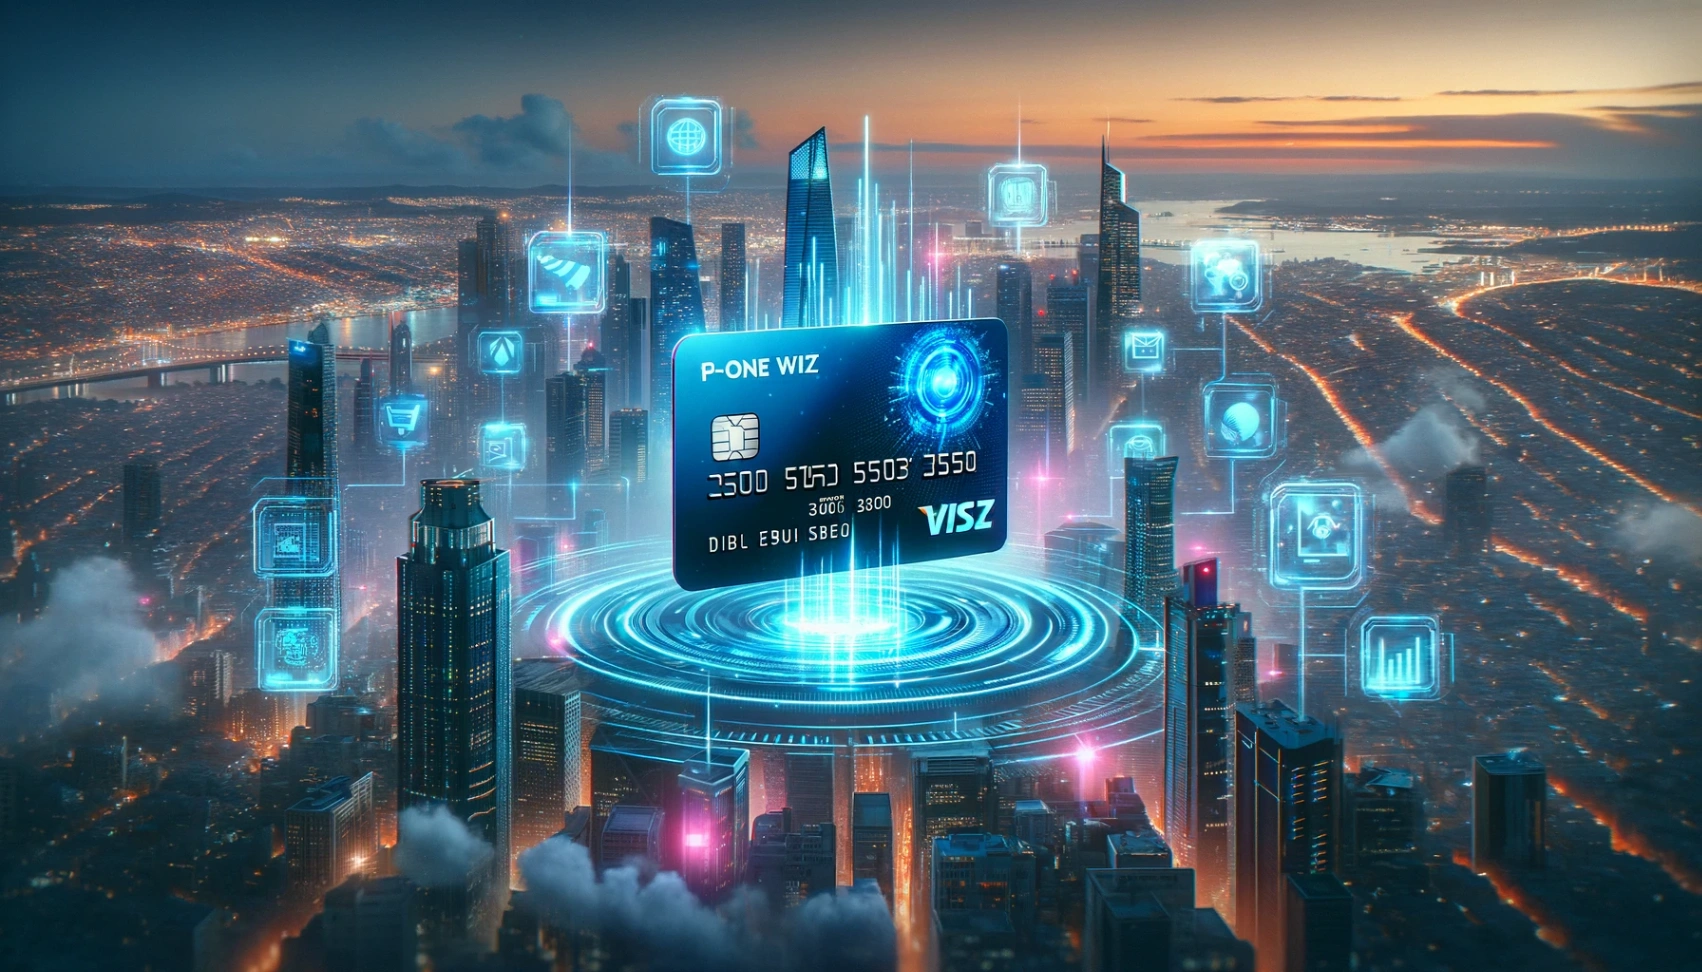 P-One Wiz Credit Card - Learn How to Apply Online